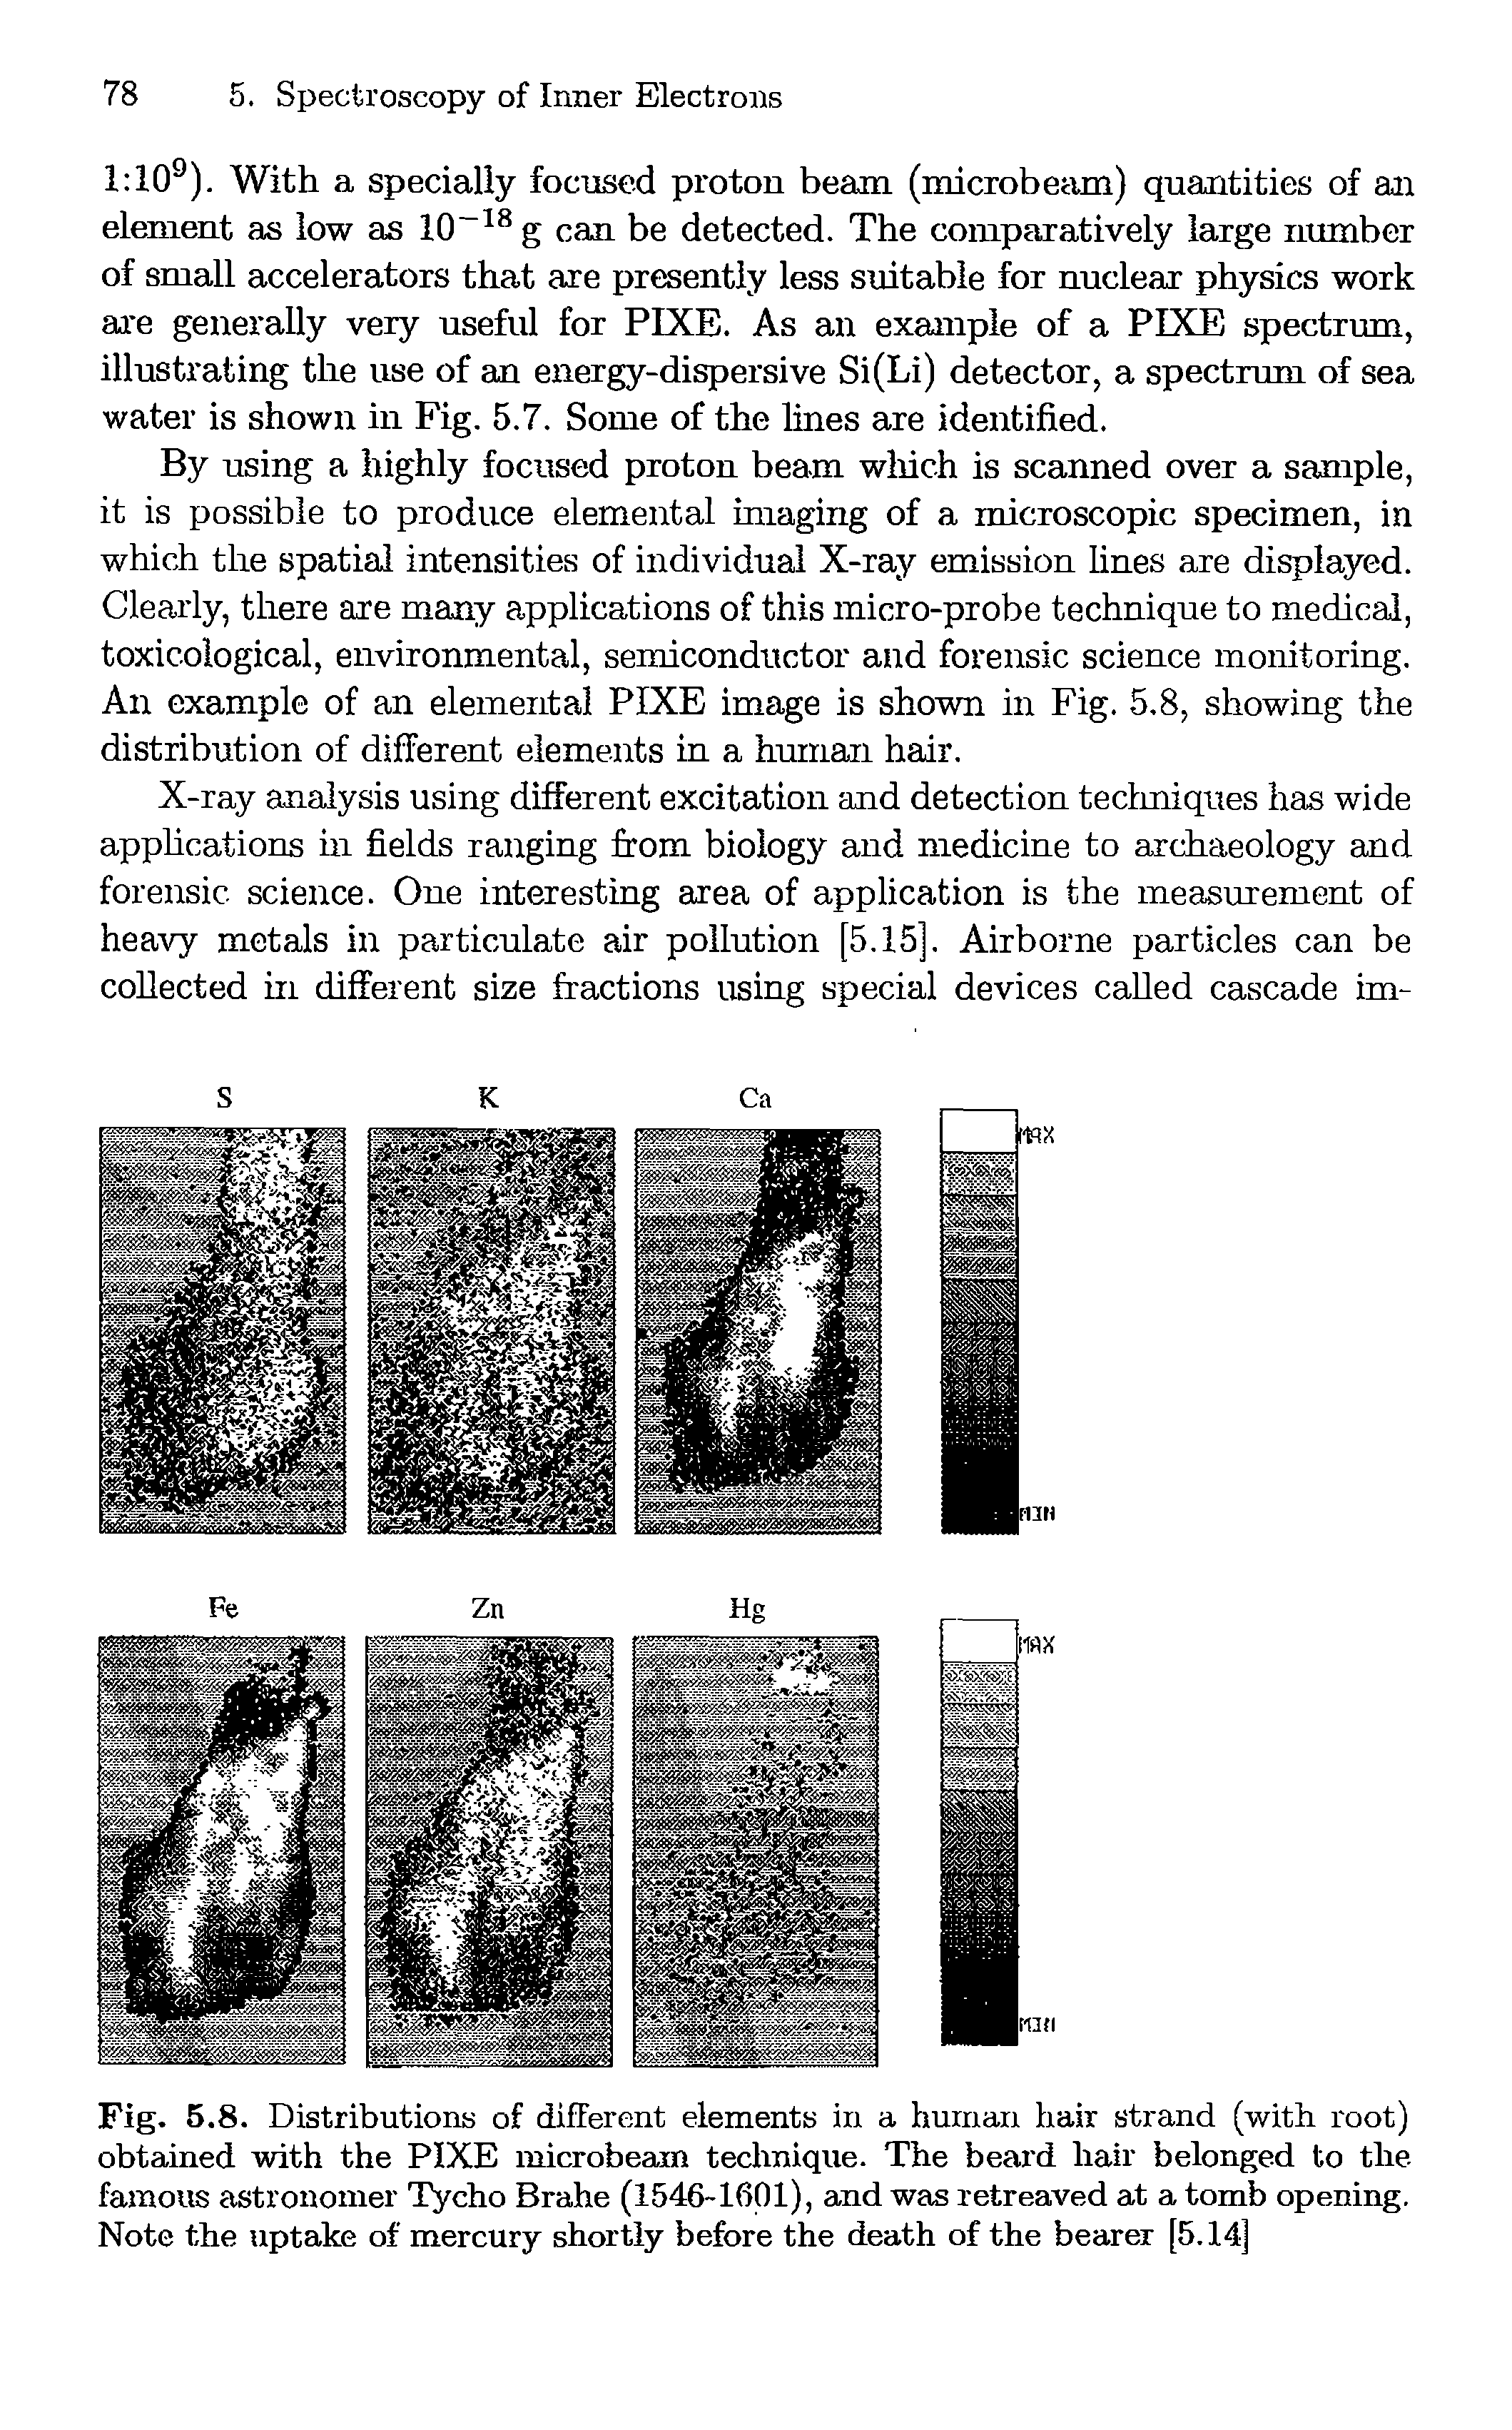 Fig. 5.8. Distributions of different elements in a human hair strand (with root) obtained with the PIXE microbeain technique. The beard hair belonged to the famous astronomer Tycho Brahe (1546-1601), and was retreaved at a tomb opening. Note the uptake of mercury shortly before the death of the bearer [5.14]...